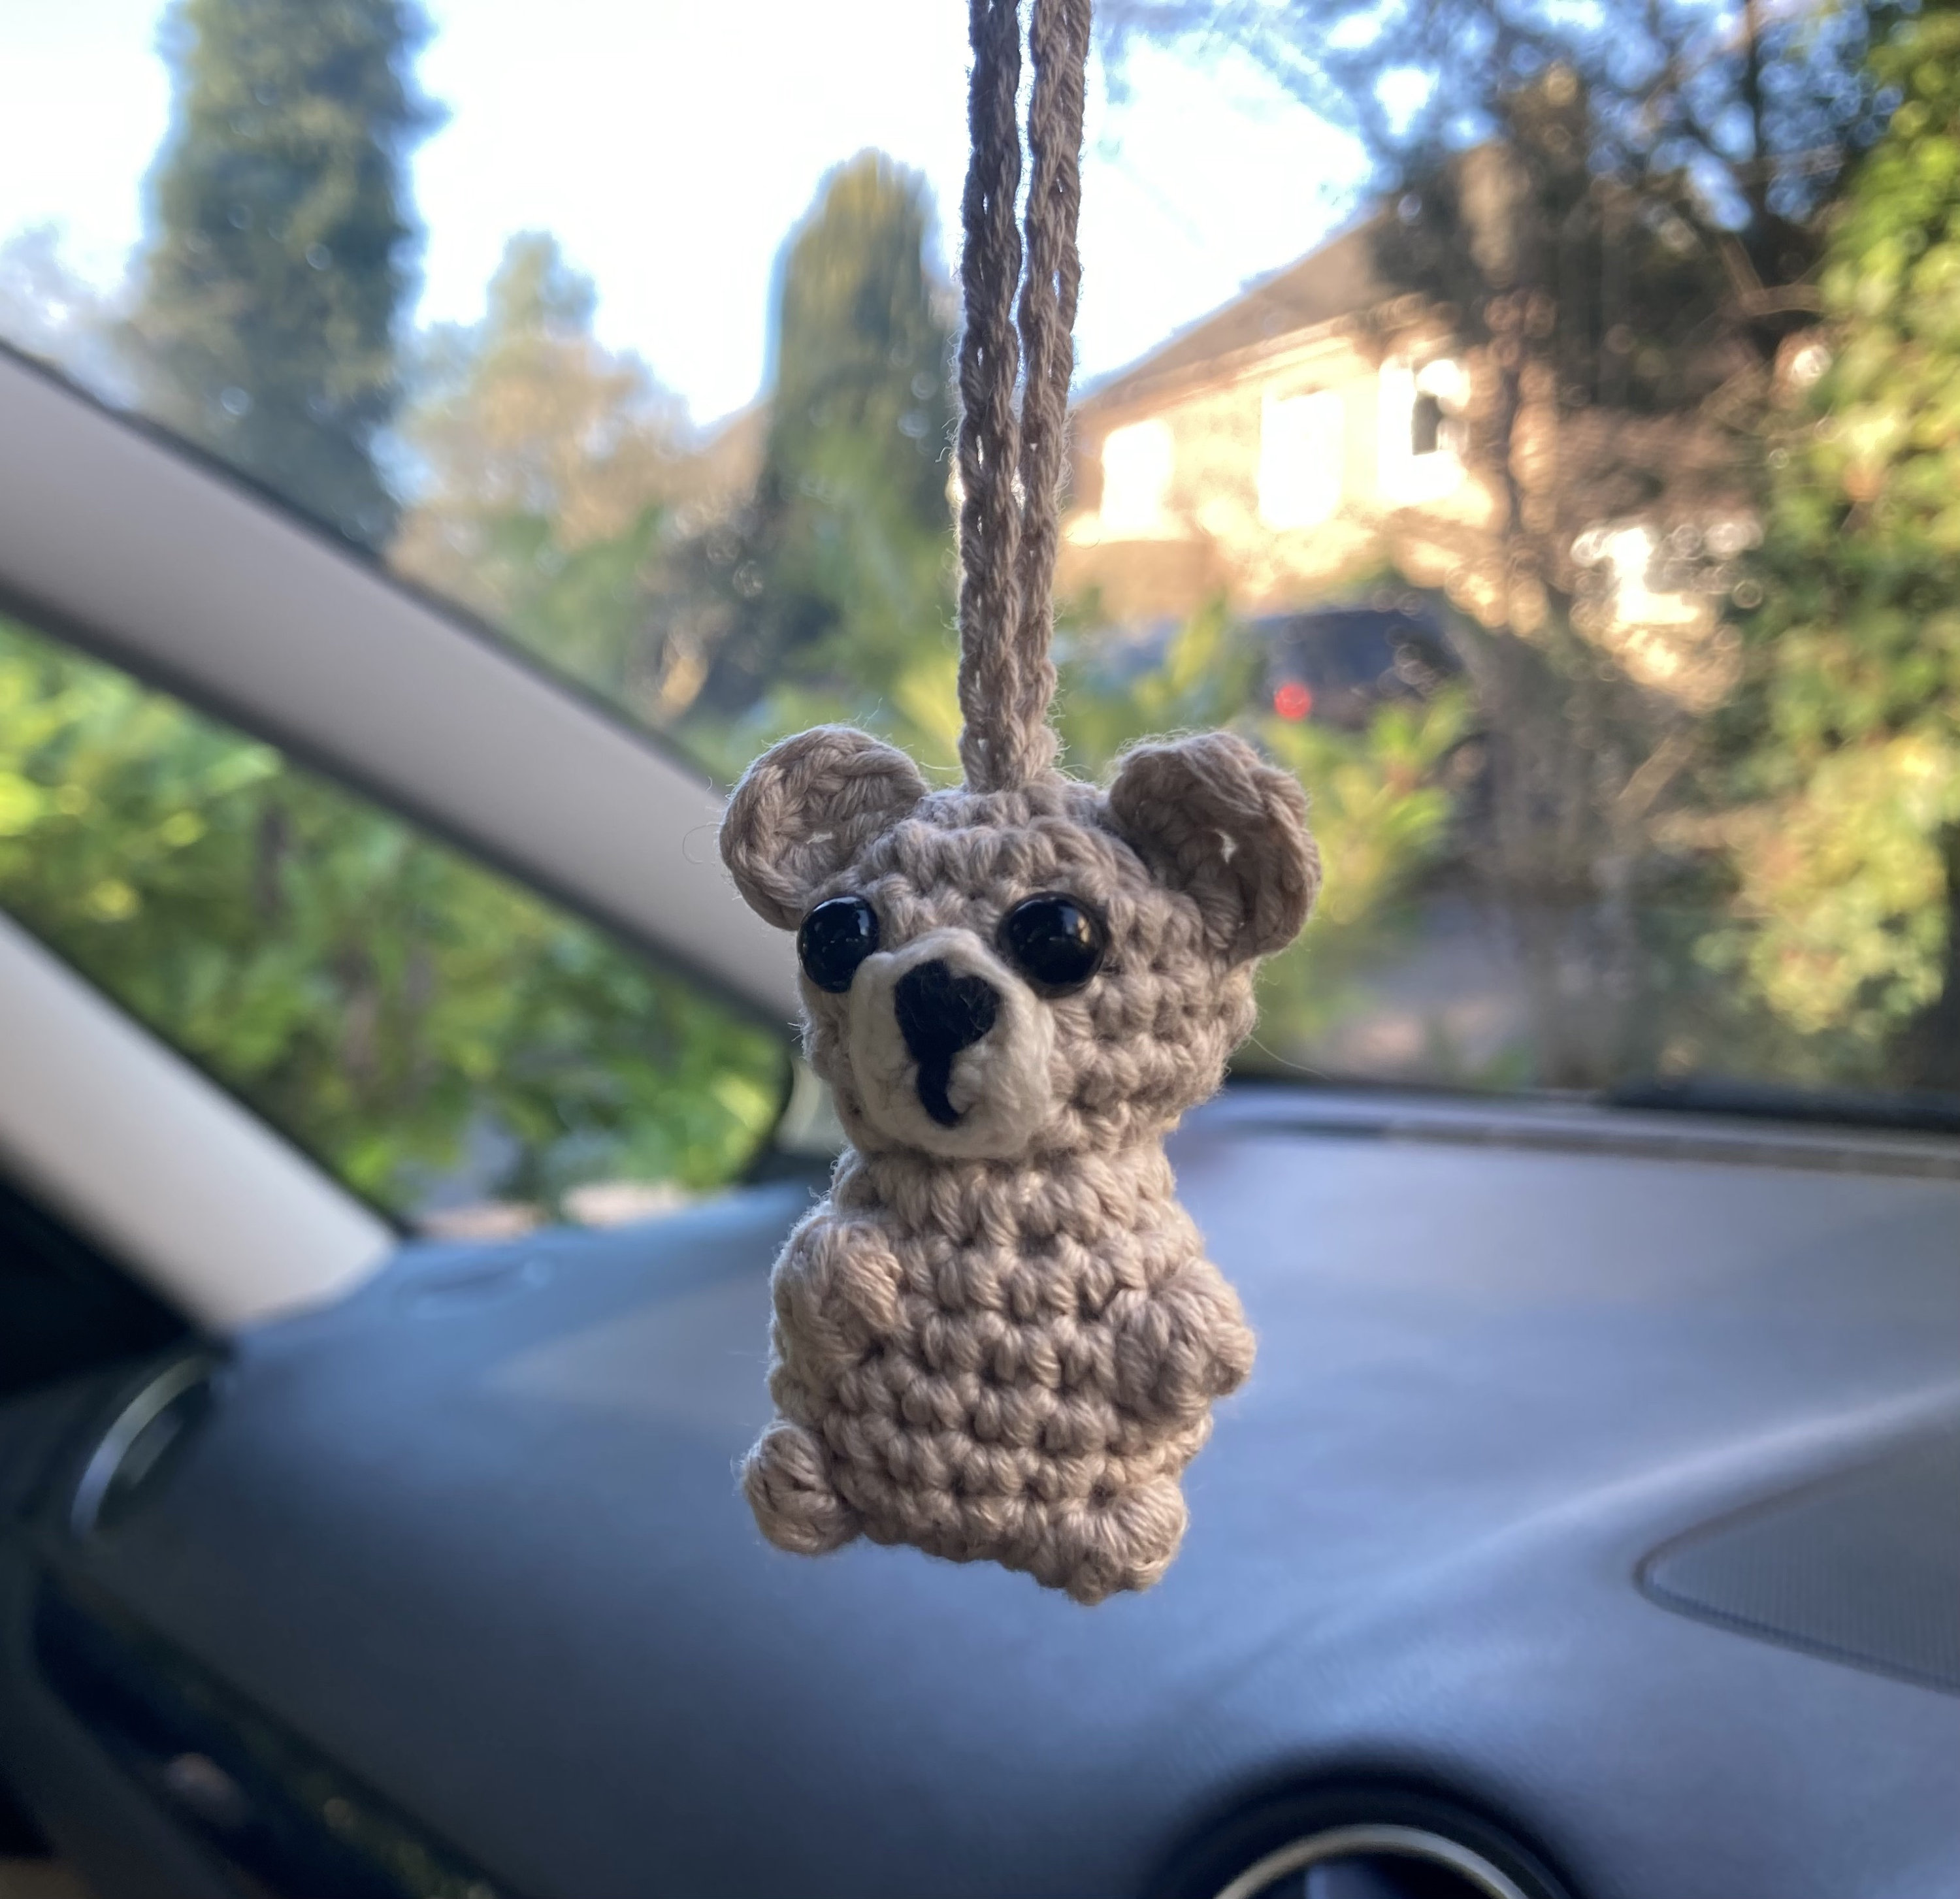 Teddy Bear Car Accessories, Cute Crochet Bear, Rear View Mirror Charm, Car  Decorations, Hanging Car Decor, Gift for Her, Gifts for Women, 